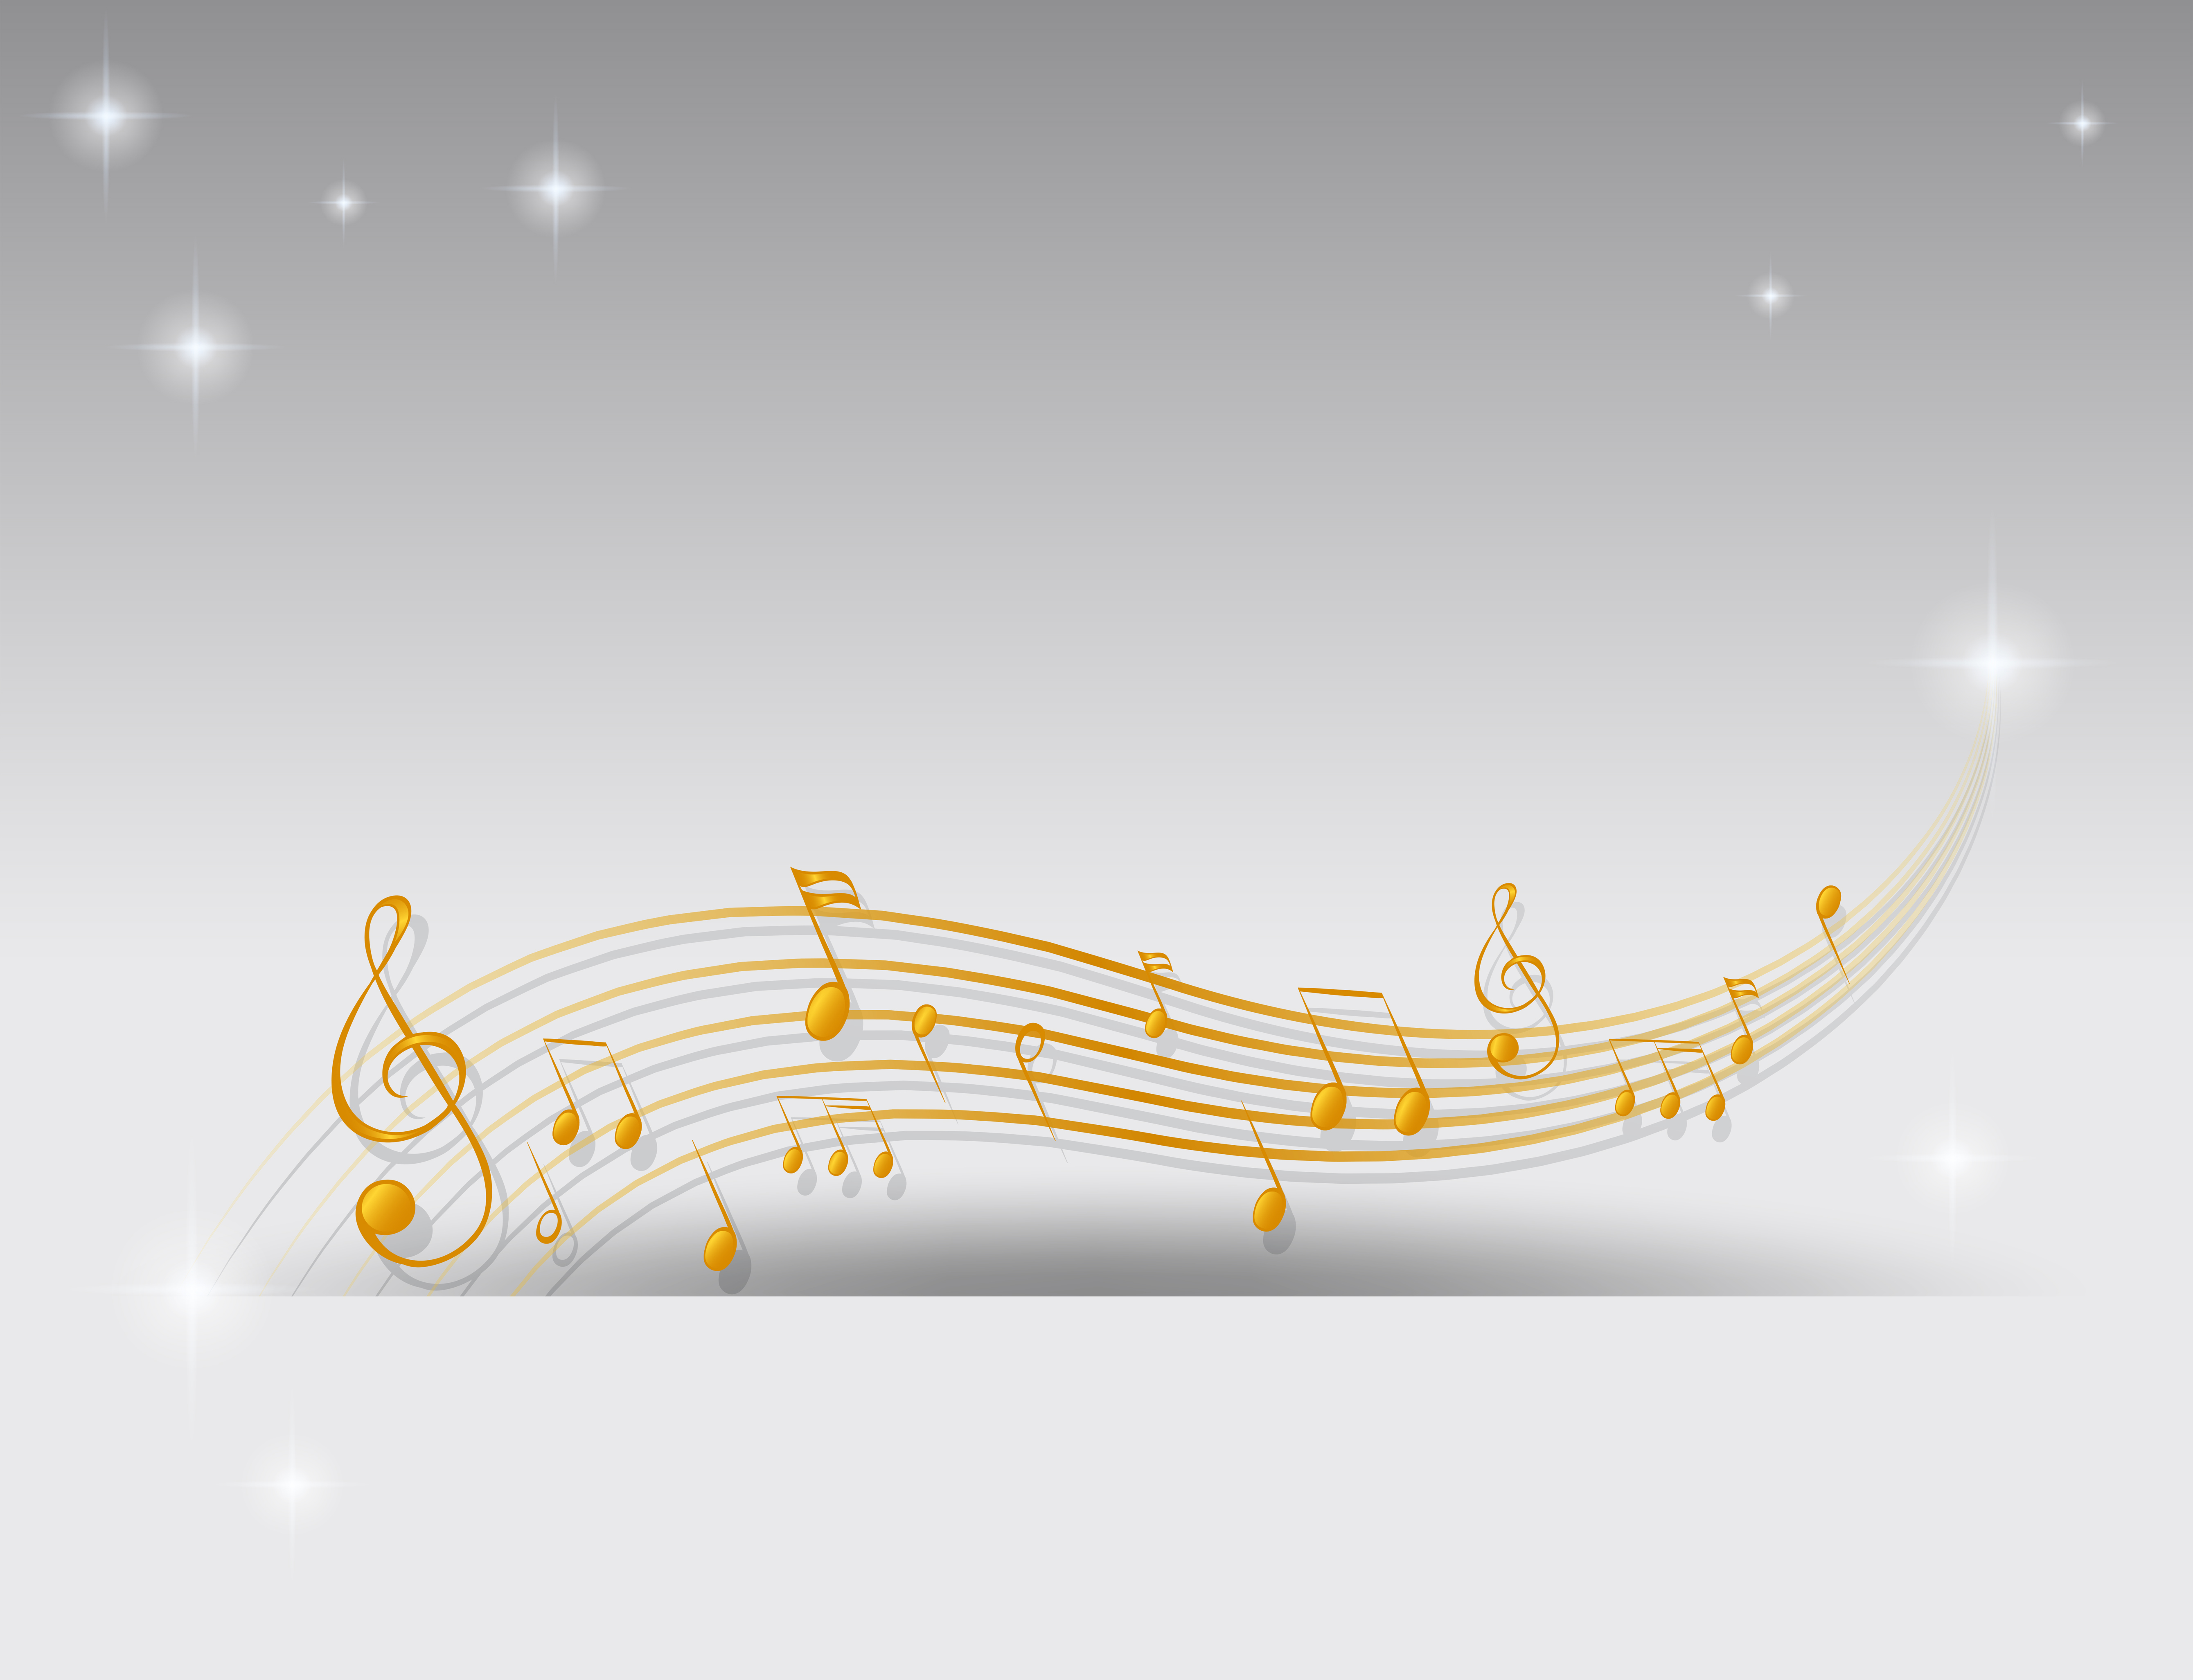 Background design with golden musical notes